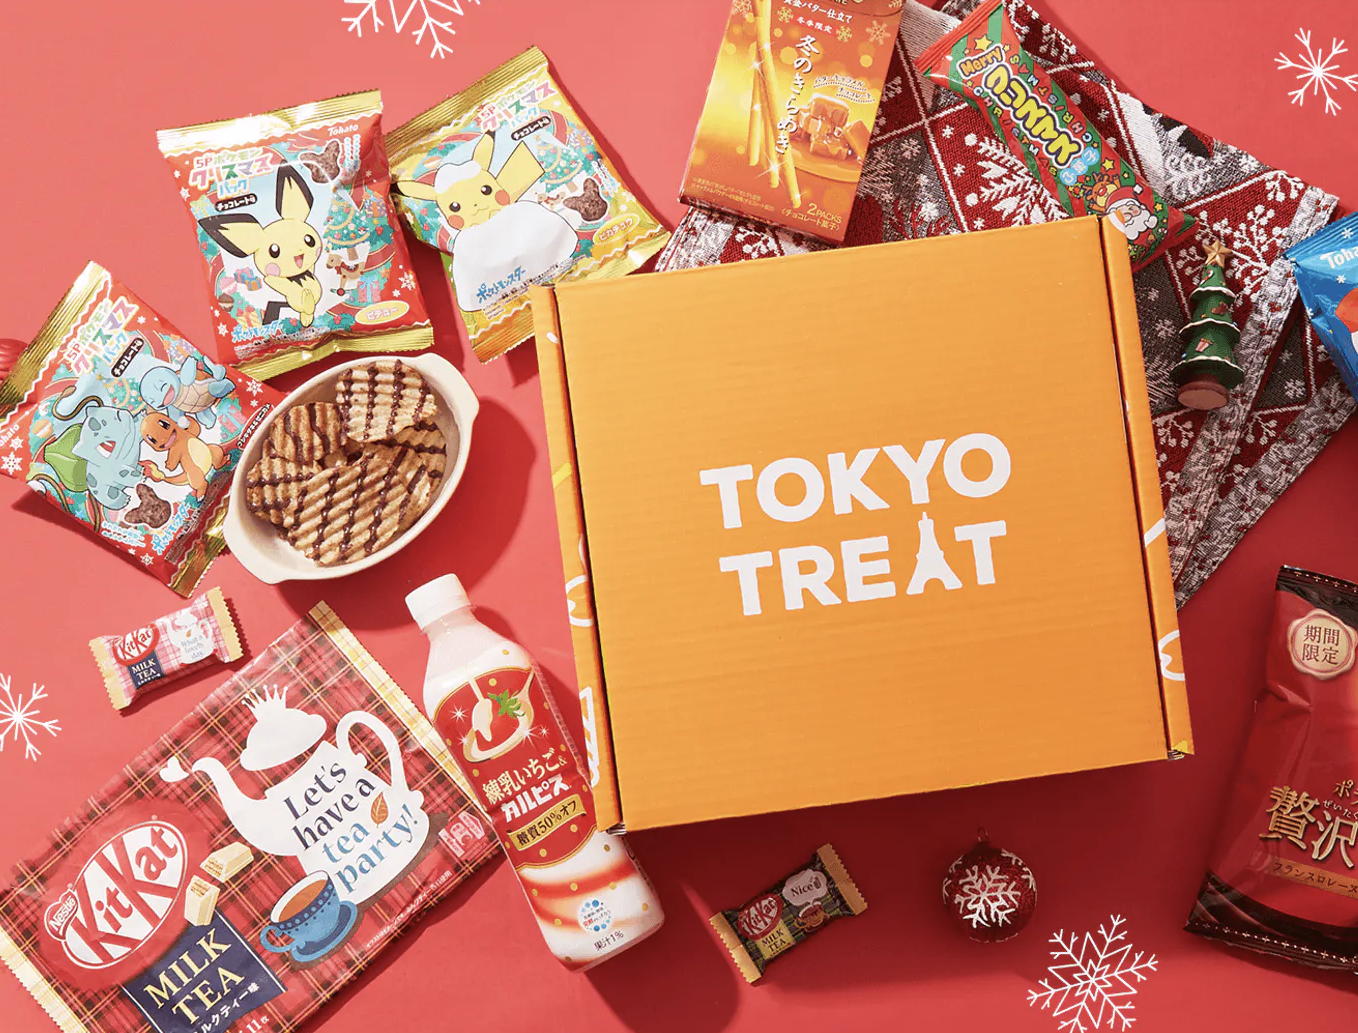 A Tokyo Treat subscription box surrounded by a wide variety of holiday Japanese snacks